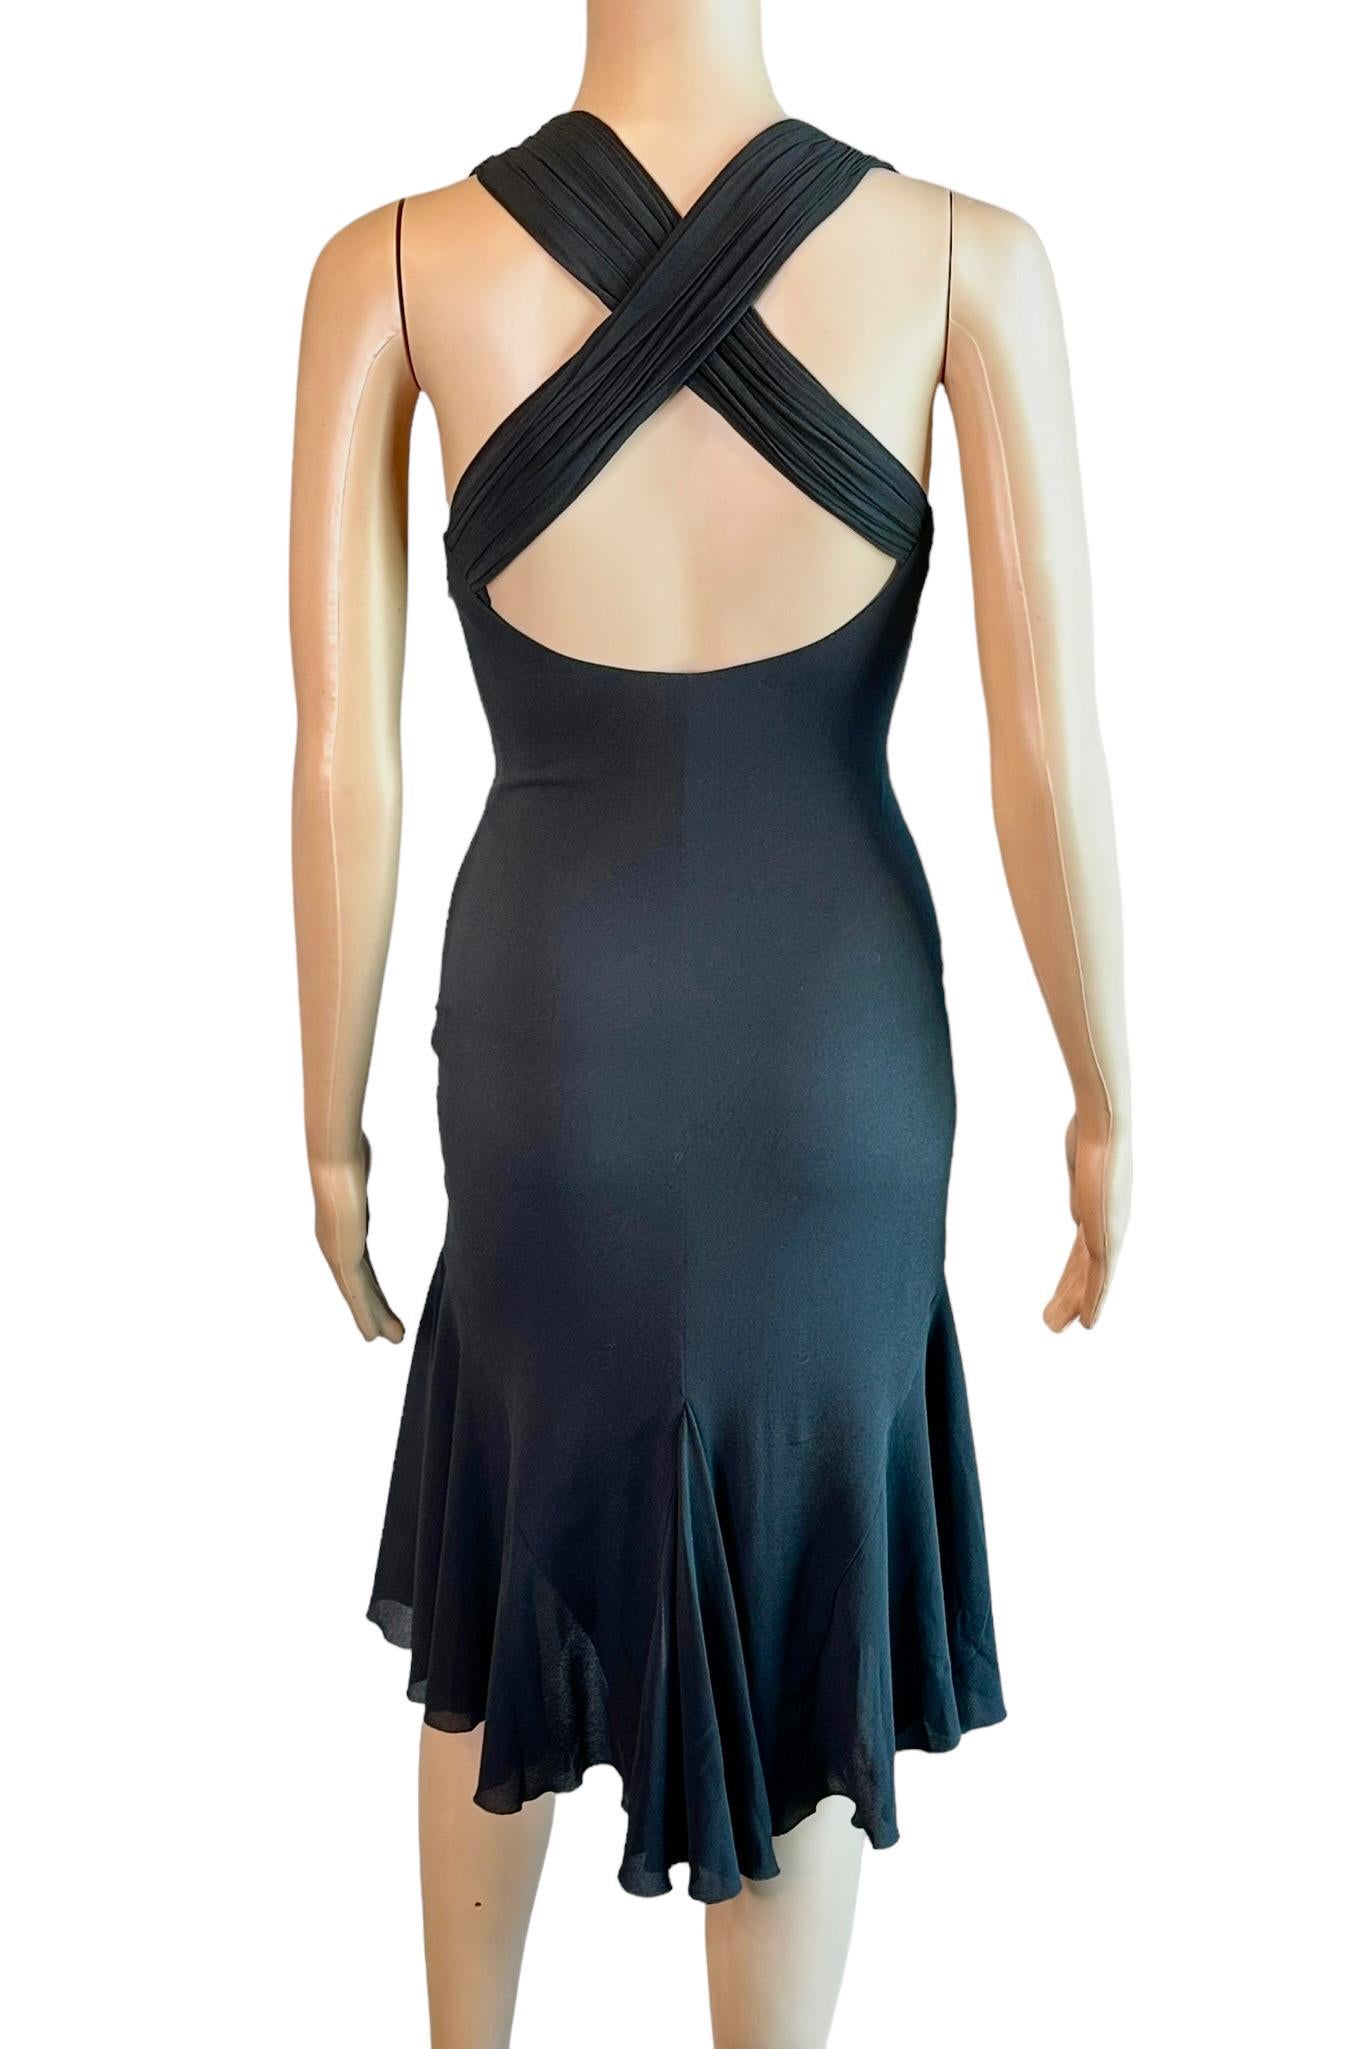 Versace F/W 2006 Plunging Ruched Ruffles Black Dress In Good Condition For Sale In Naples, FL